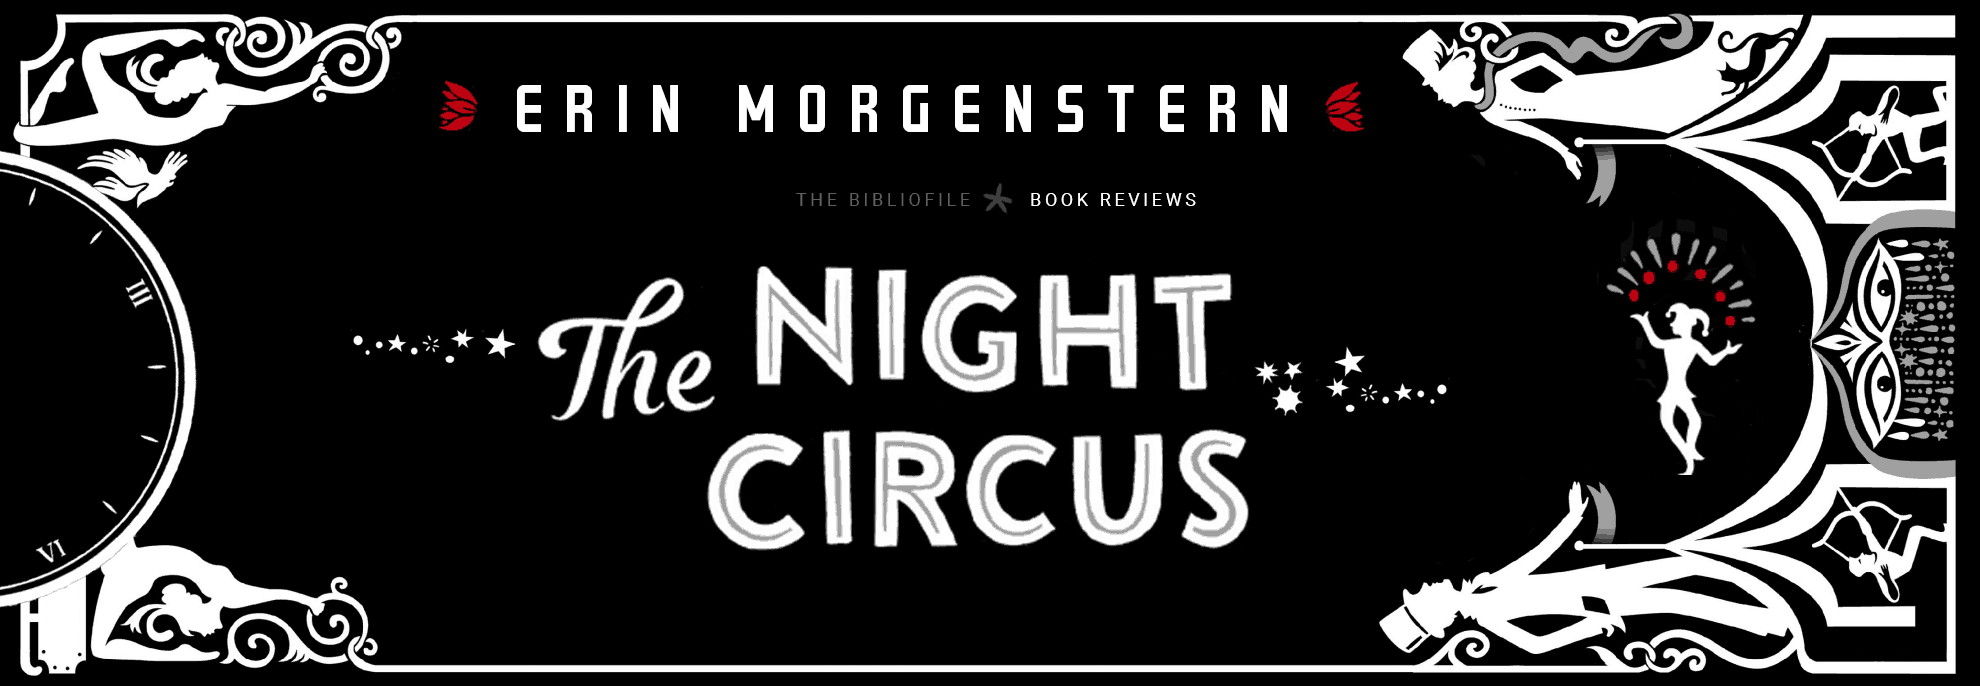 night circus by erin morgenstern